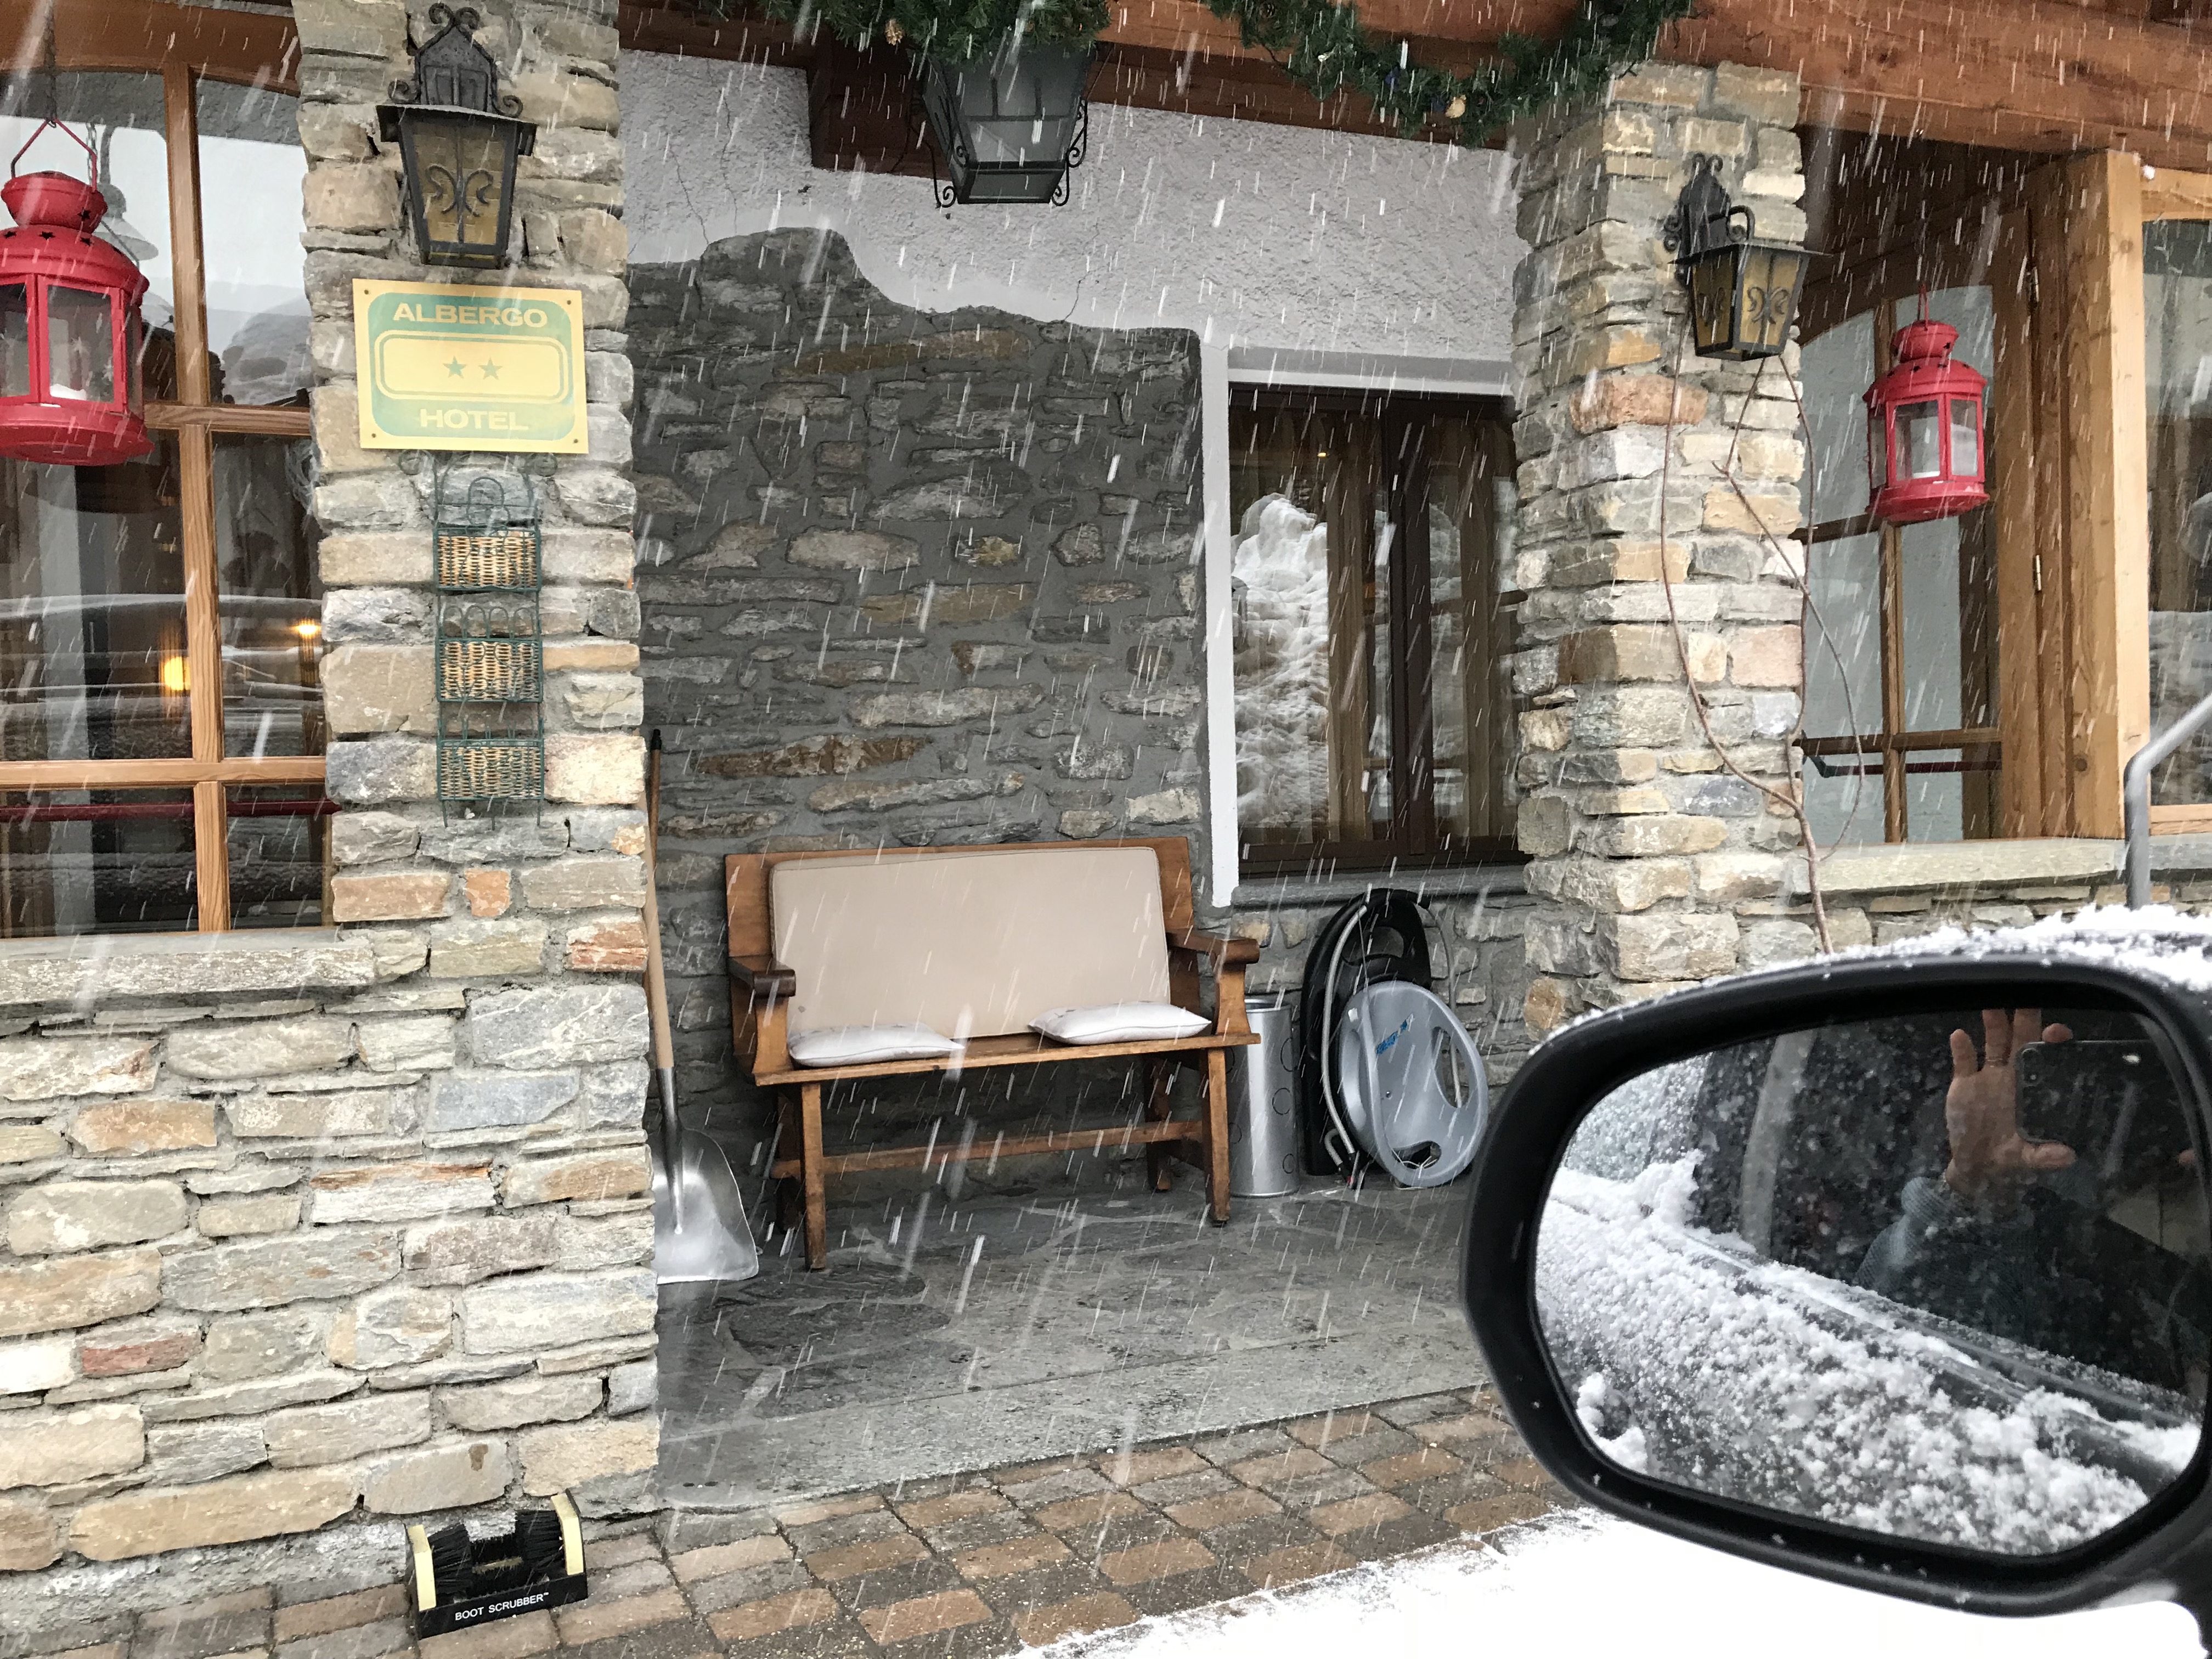 Snow before leaving Courmayeur - Photo by The-Ski-Guru. Last part of our family half term trip – Picture-perfect Courmayeur Mont Blanc.